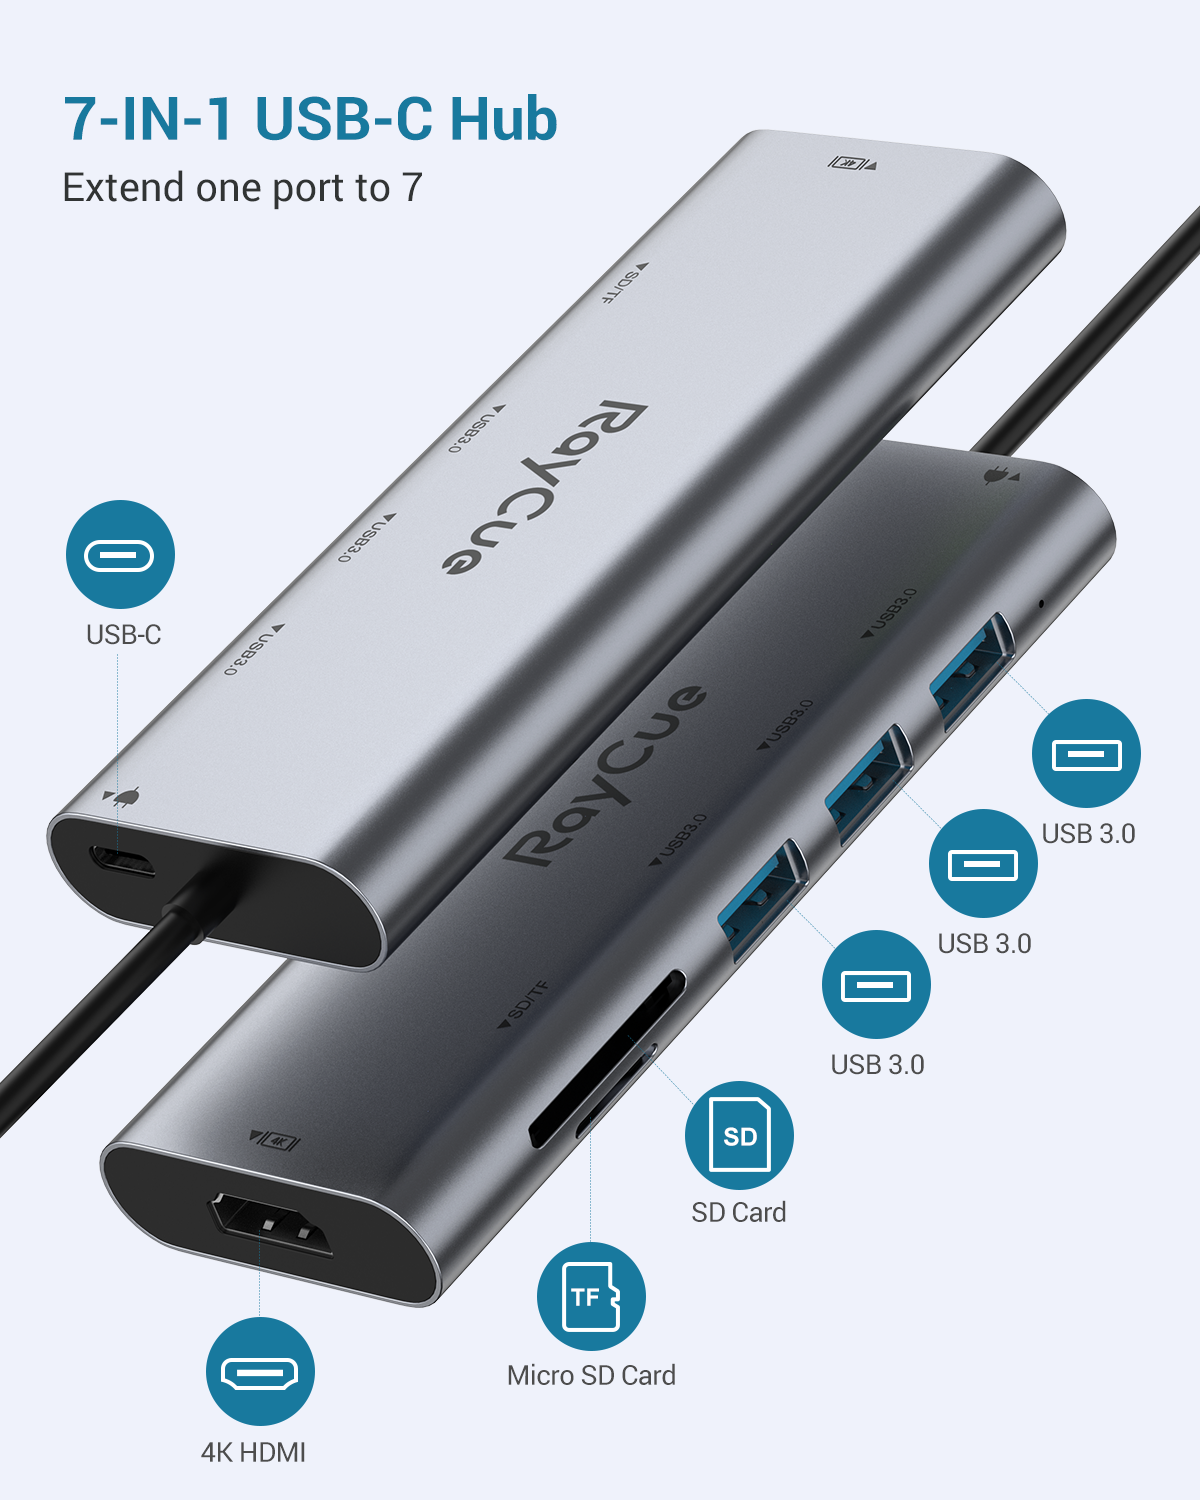 RayCue ExpandPro Pime 7-in-1 USB-C Hub for Laptops&Tables with USB-C Port